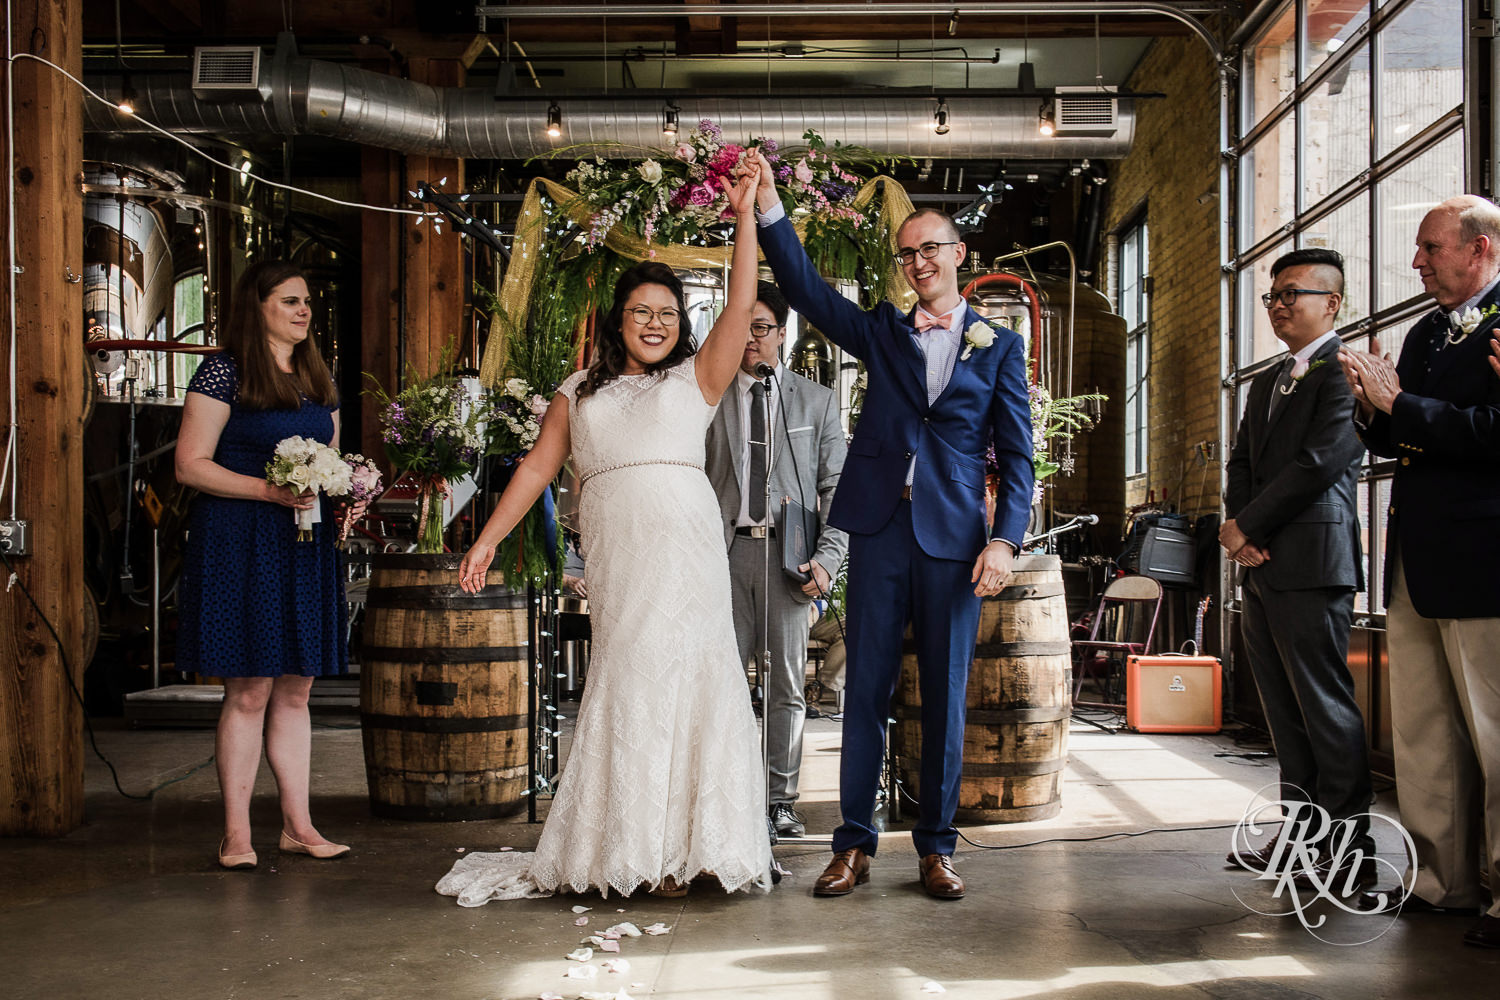 Asian bride with glasses and groom smile during wedding ceremony at 612 Brew in Minneapolis, Minnesota.